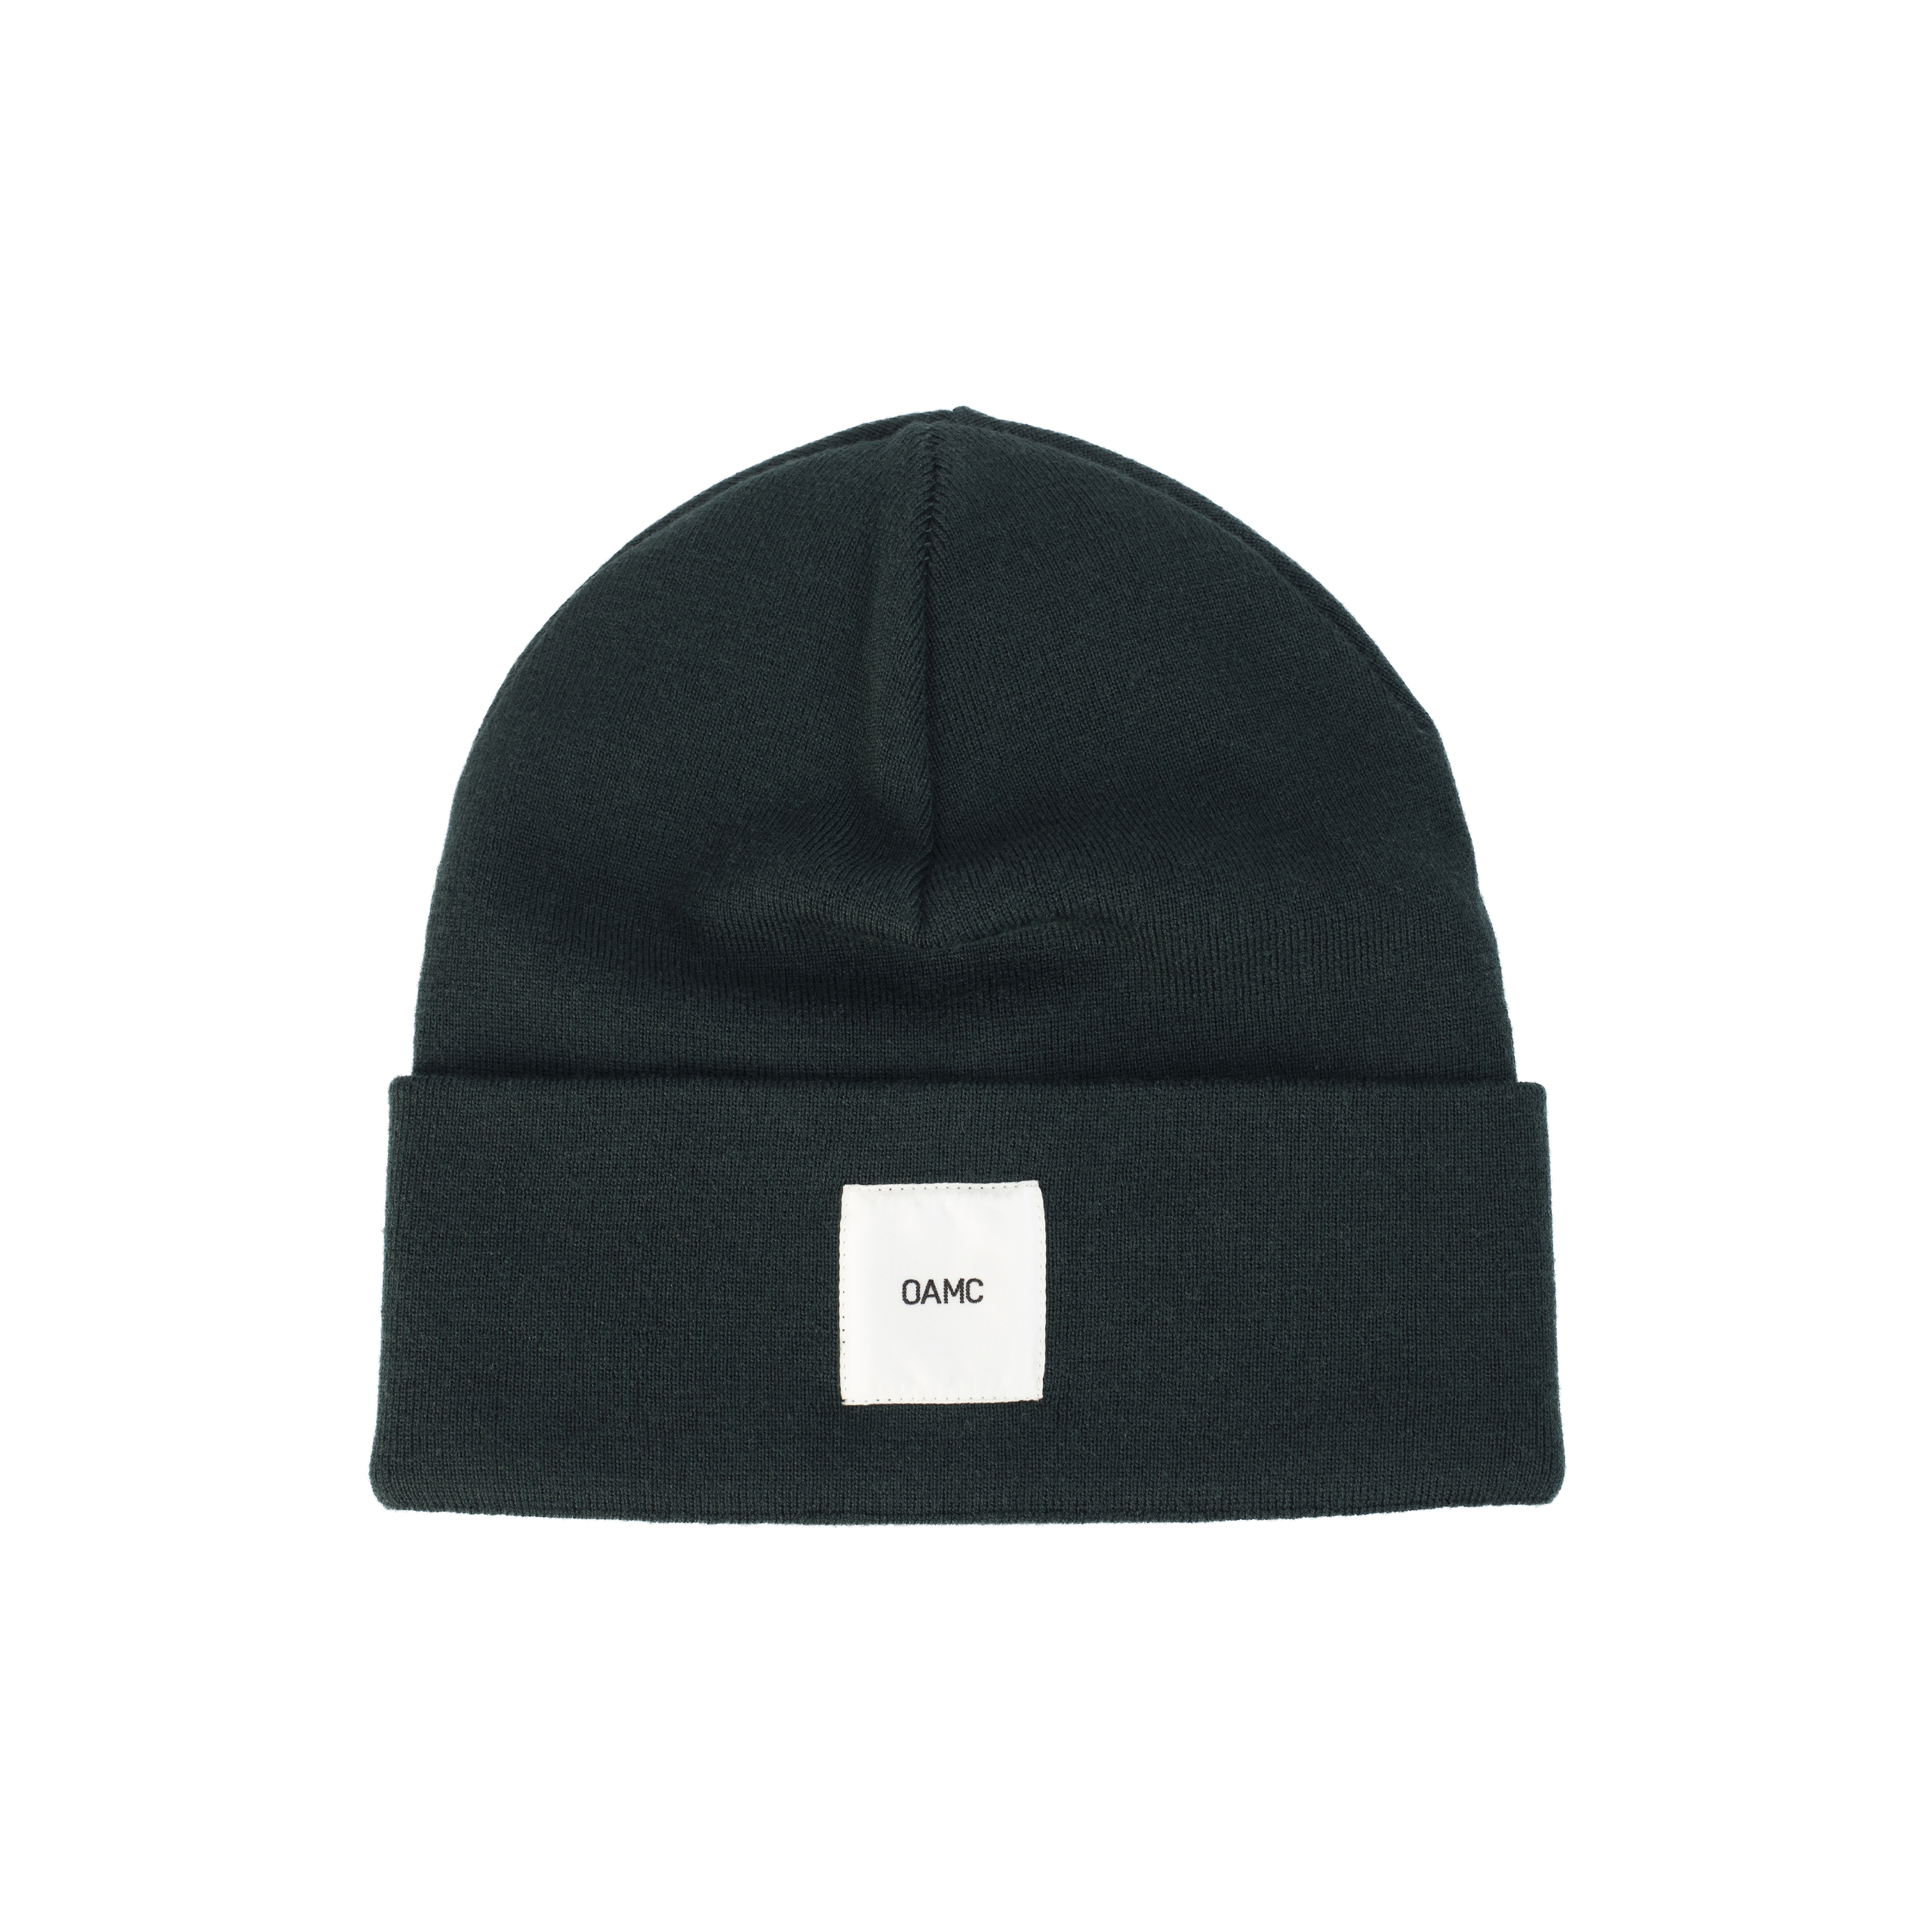 Wool beanie with patch